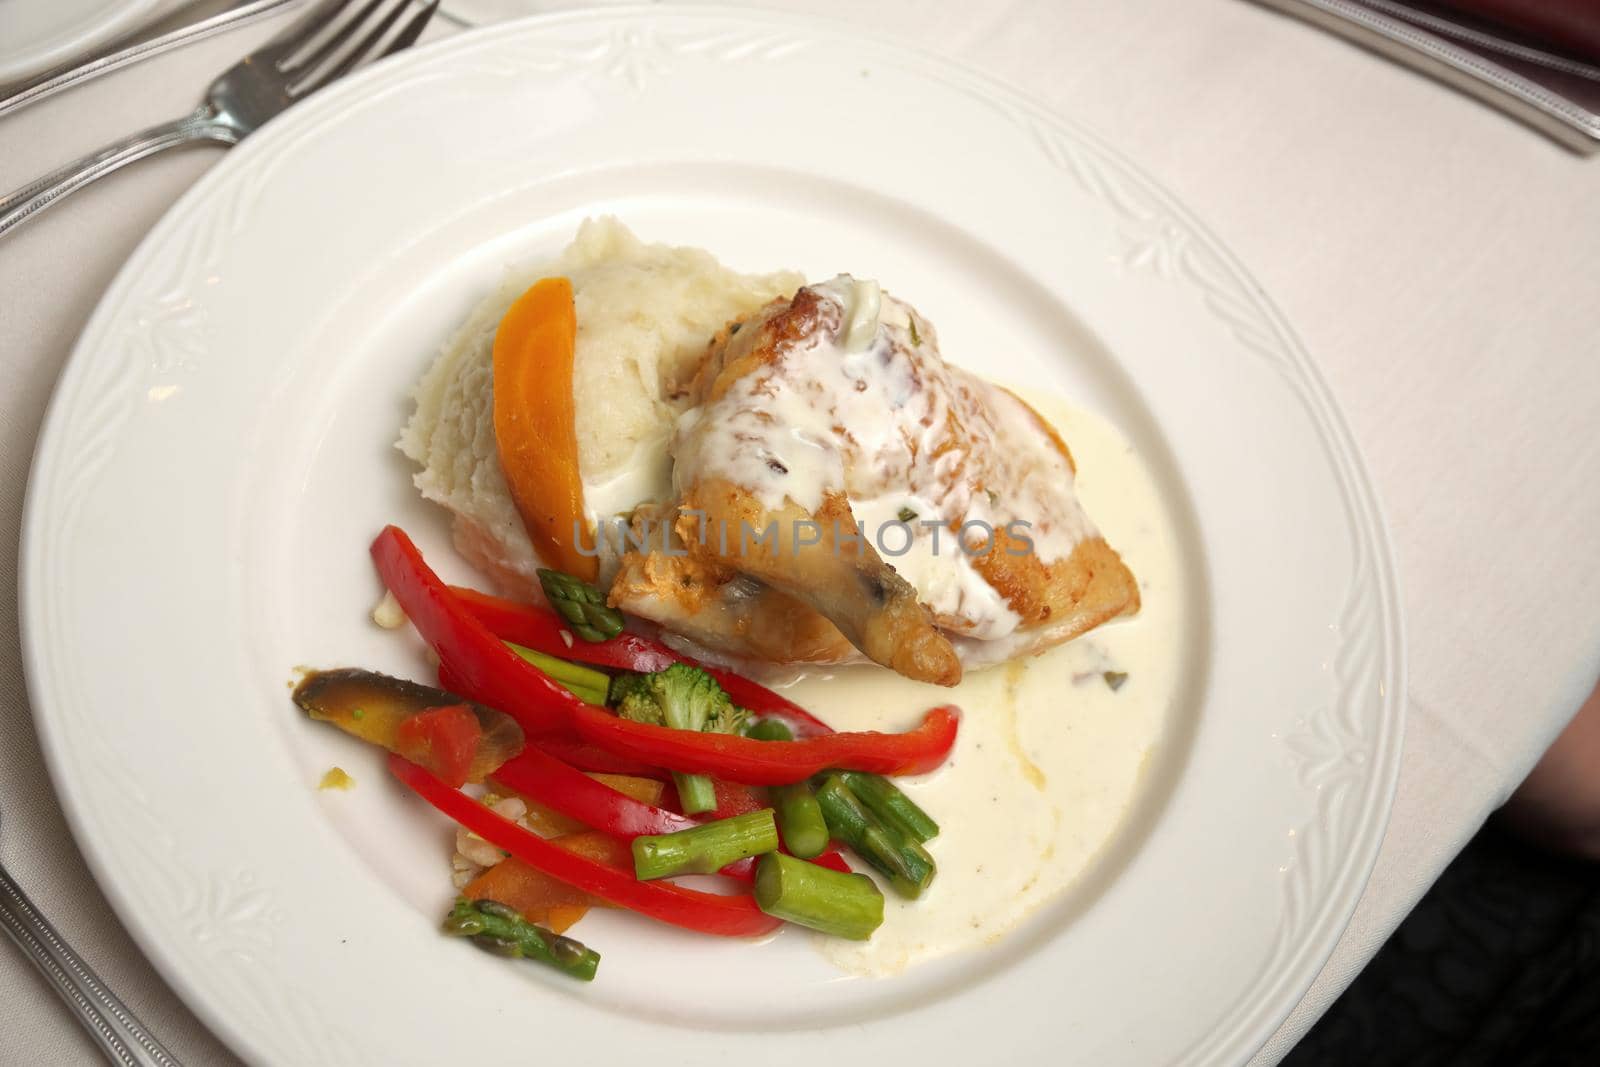 Roasted Chicken Dinner with White Cream Sauce and Sauteed Seasonal Vegetables and Mashed Potatoes. High quality photo